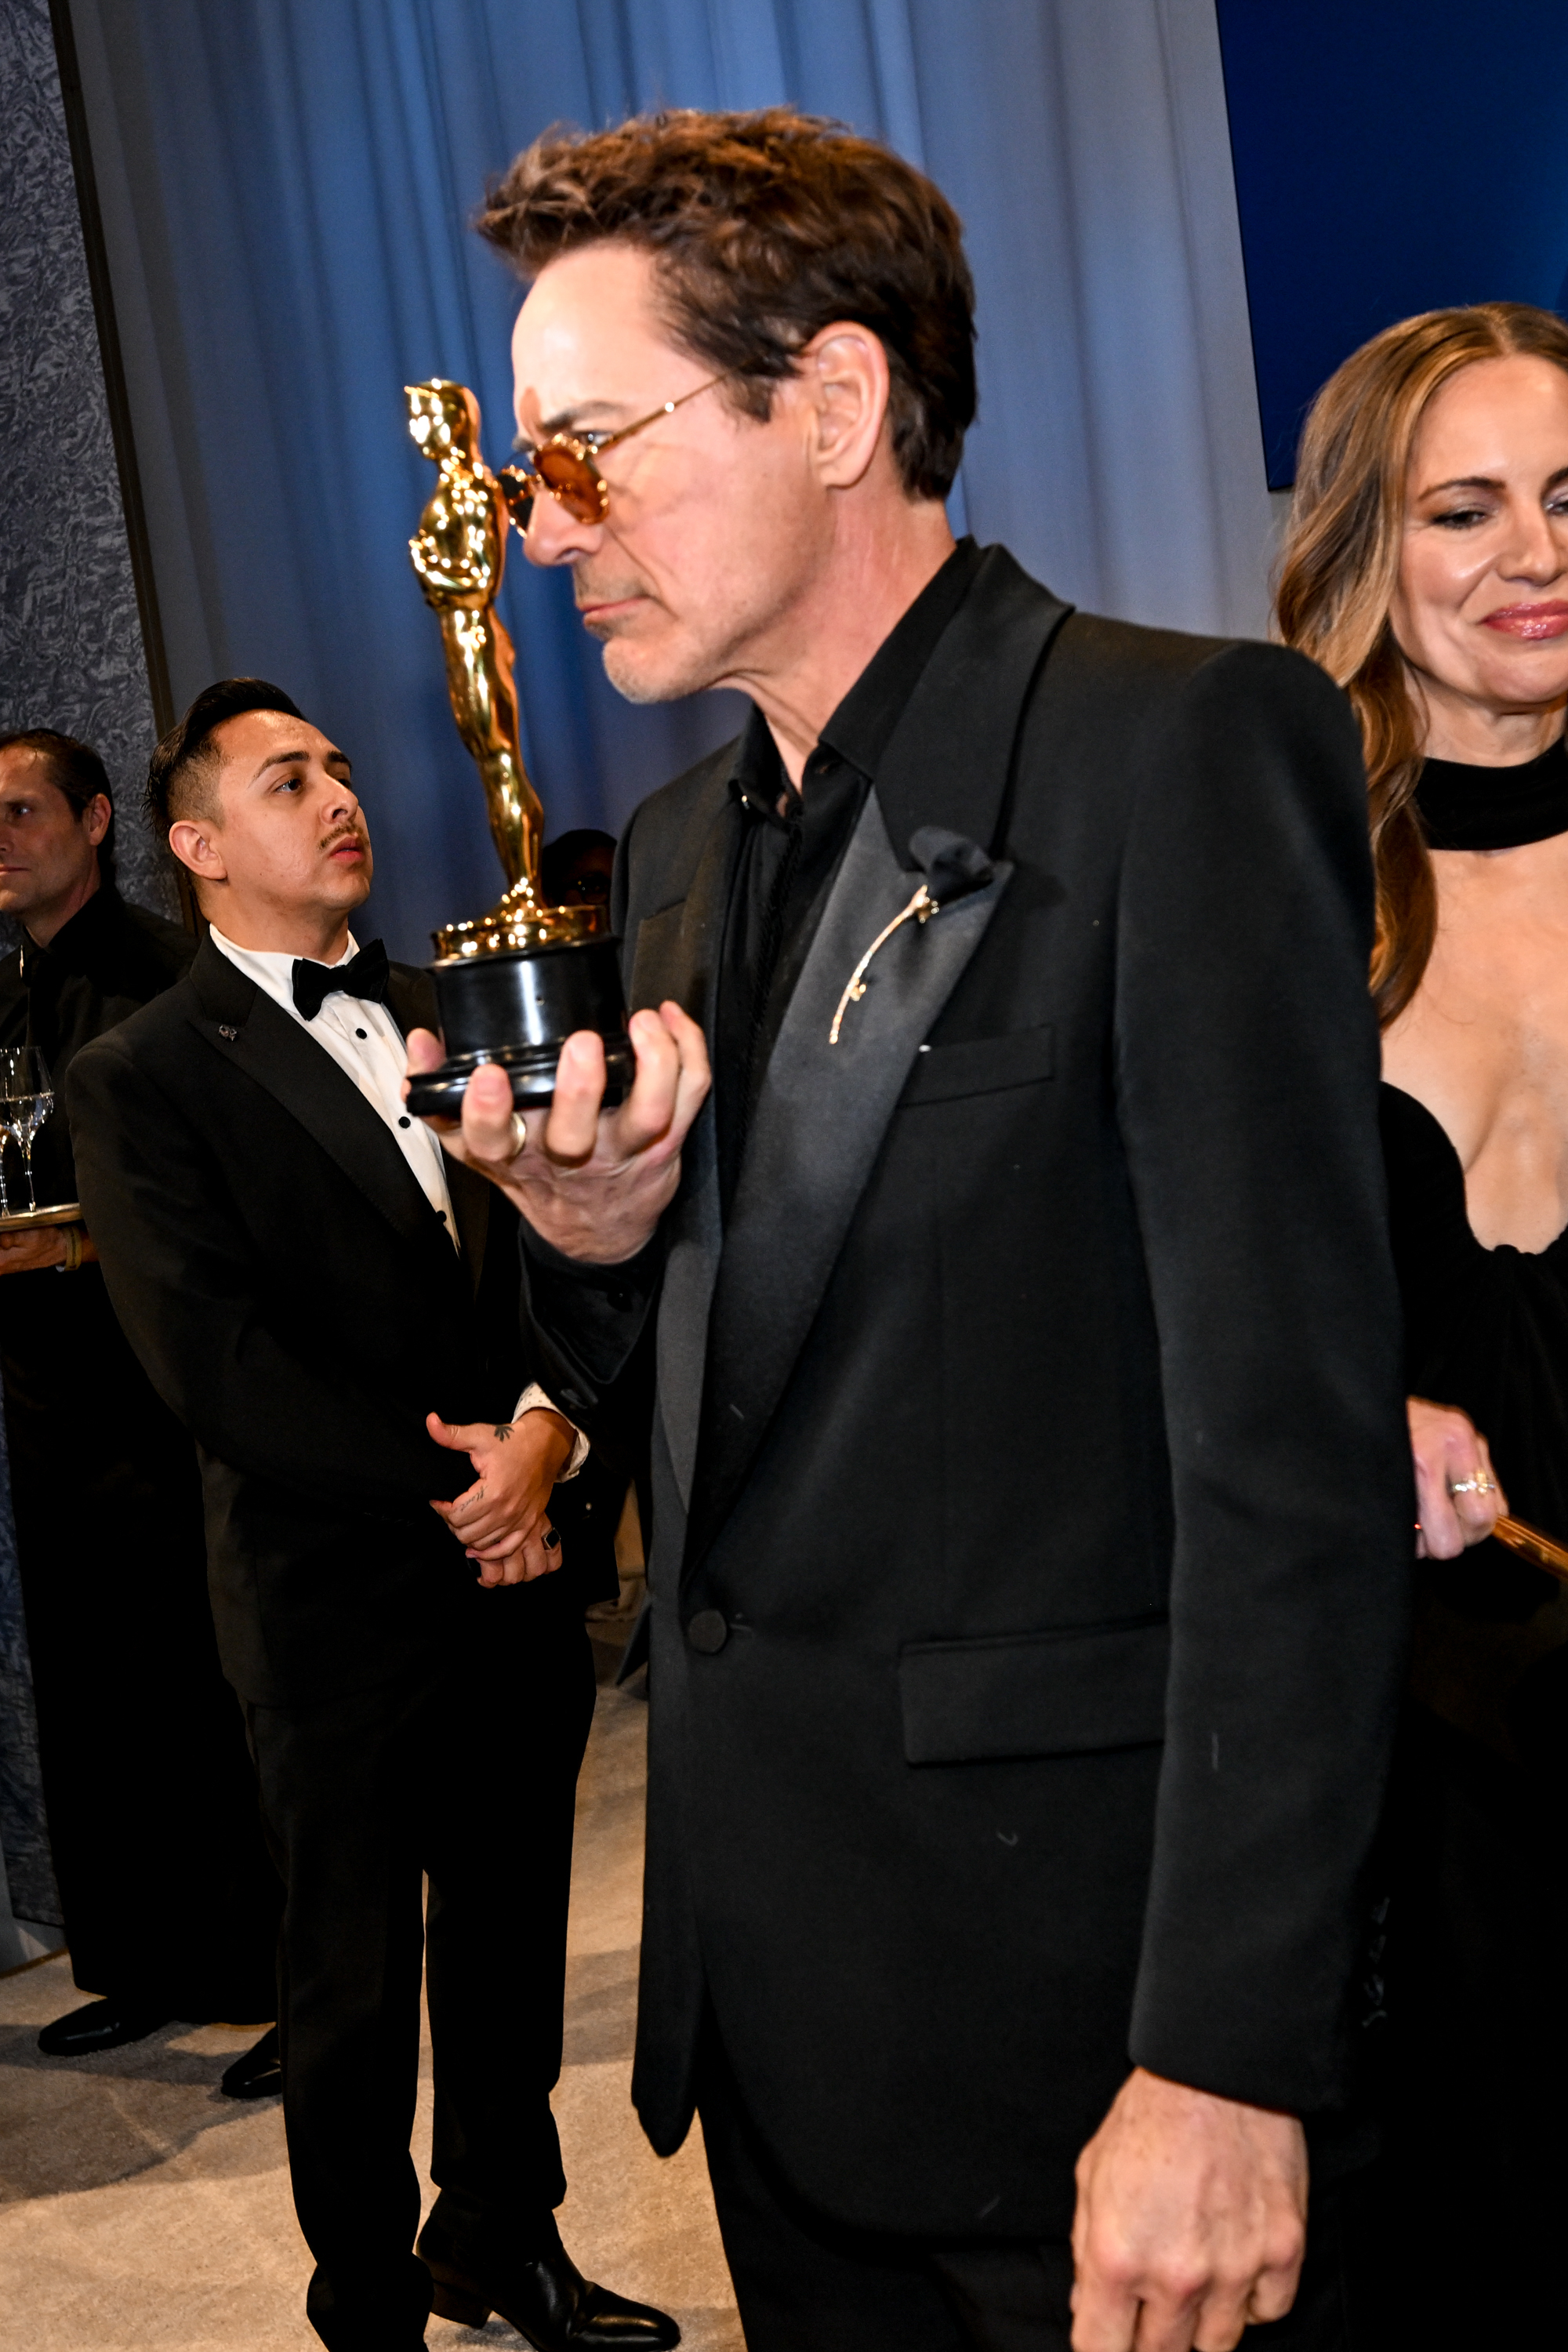 RDJ in a suit holding an Oscar close to his face with other people around him